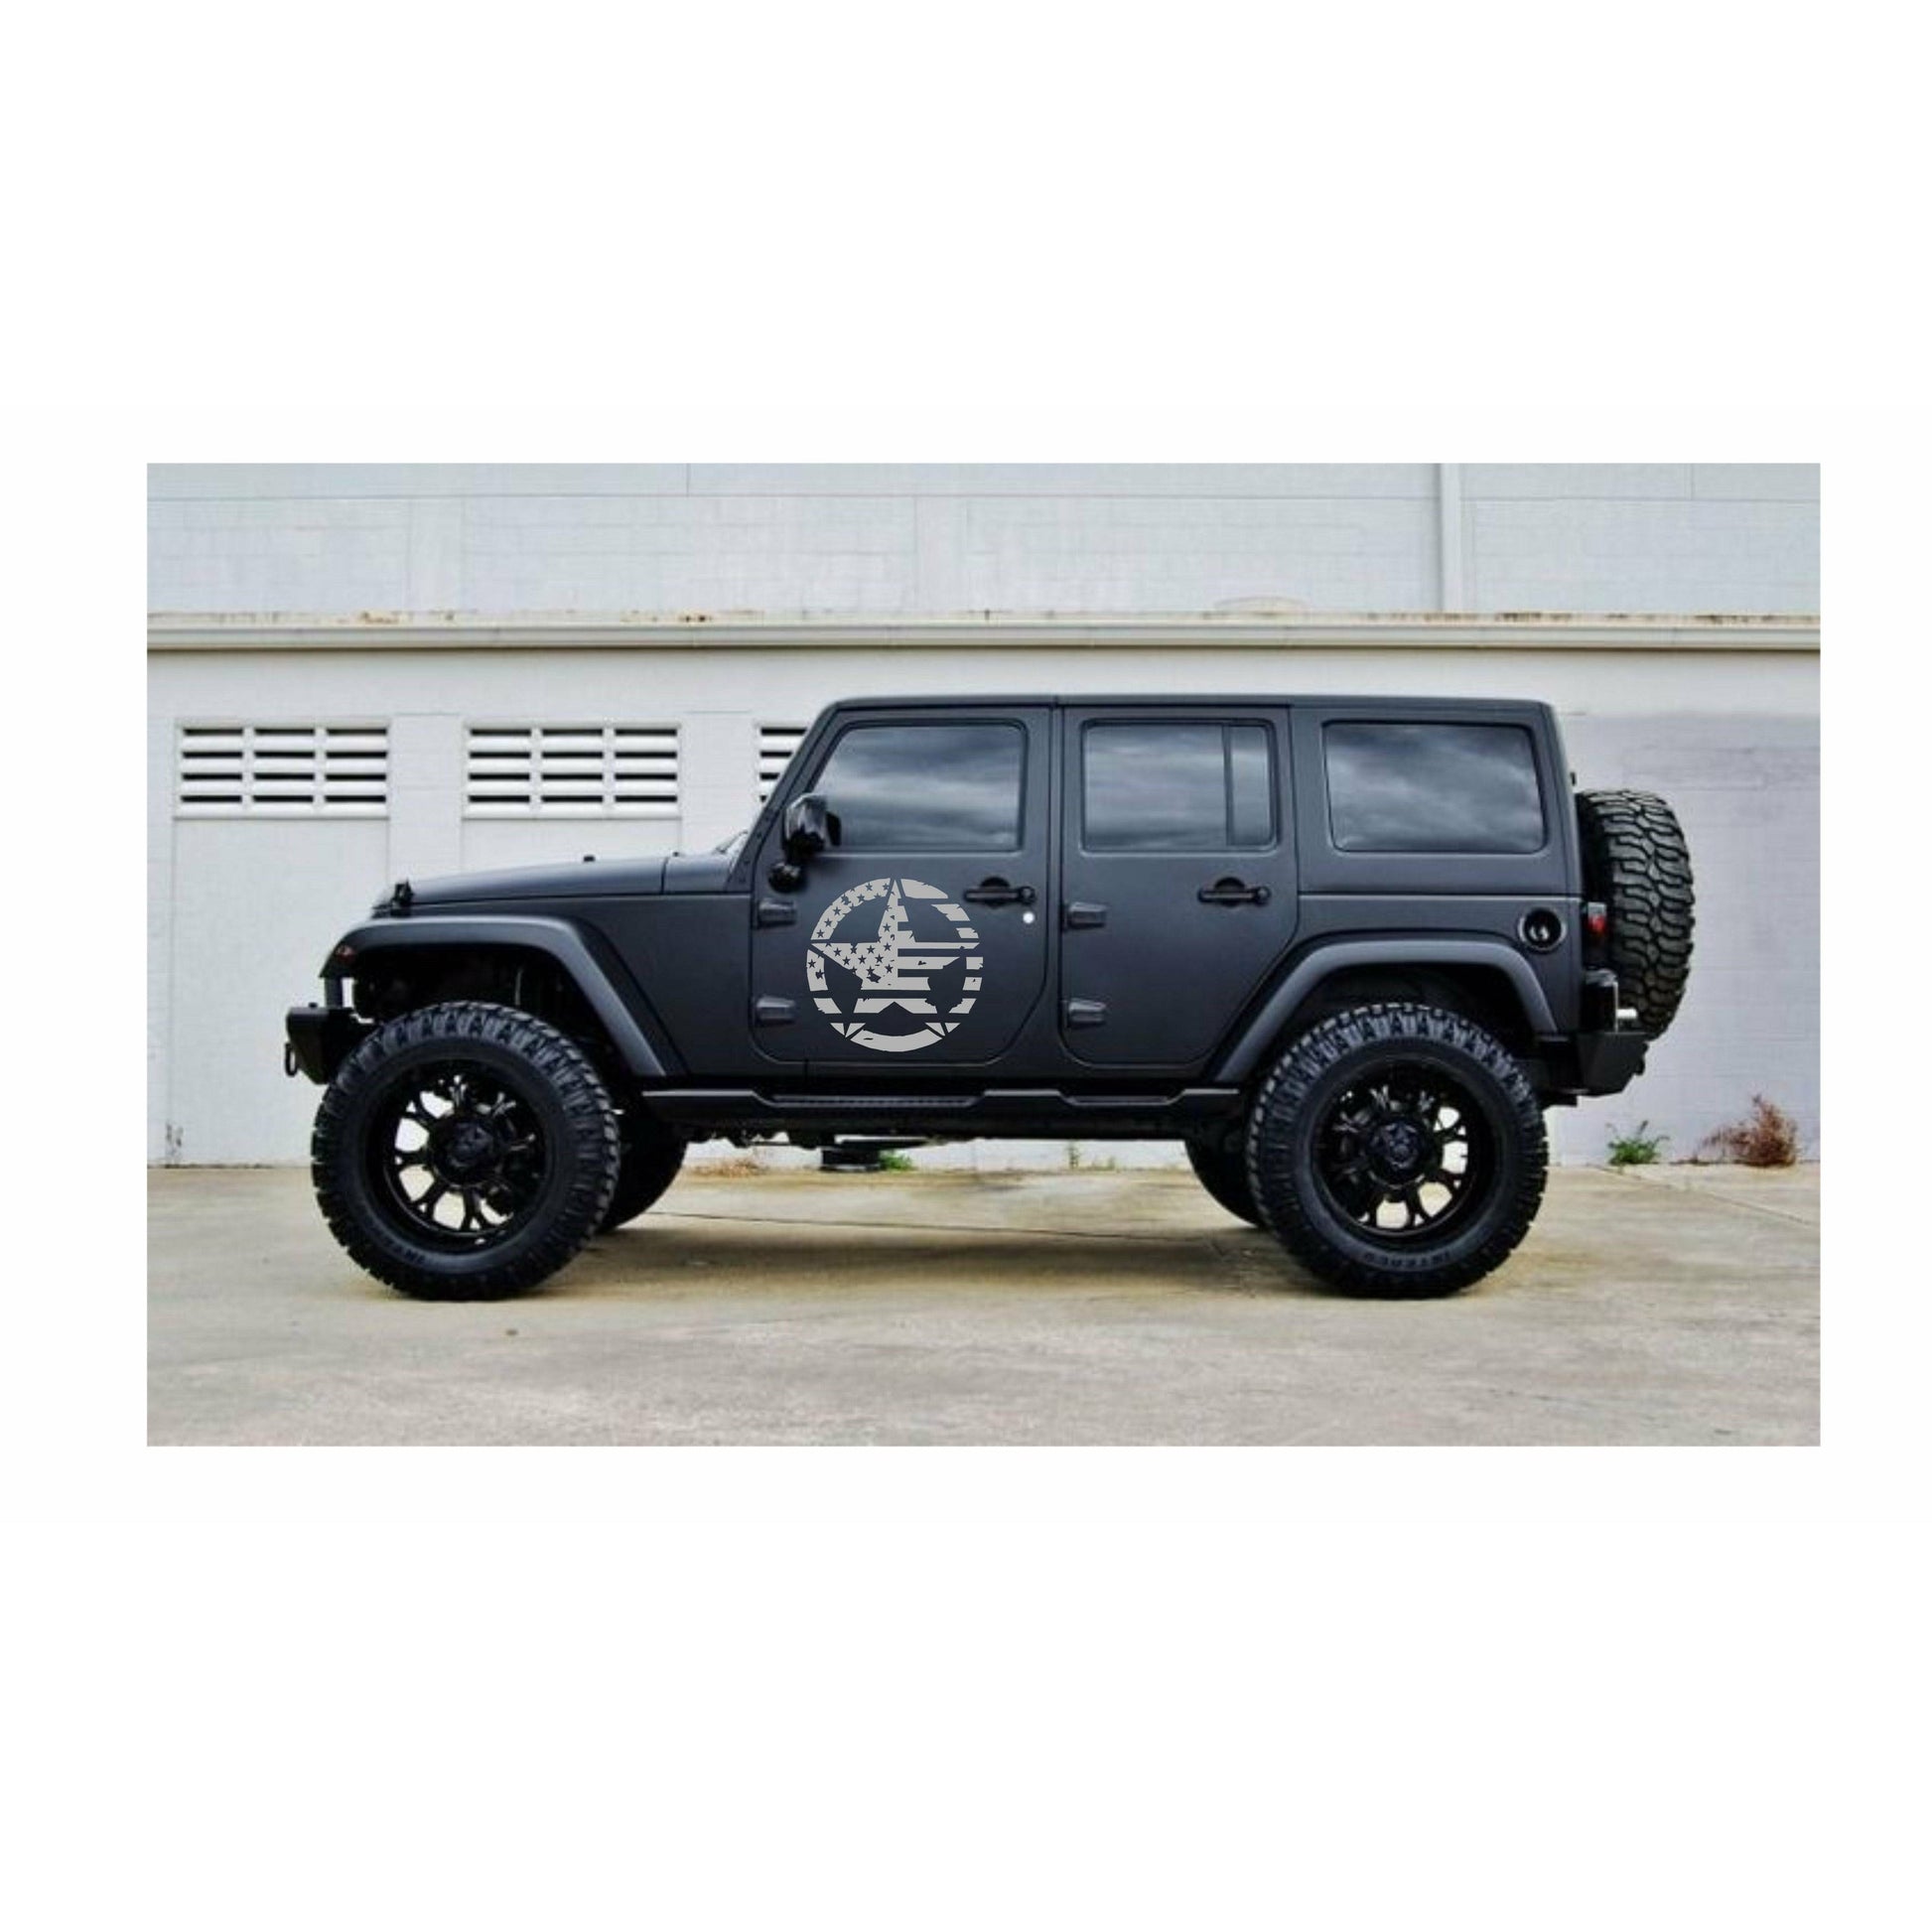 Sticker Star Universal suitable for Jeep Wrangler JK Truck or Other Cars  Black 